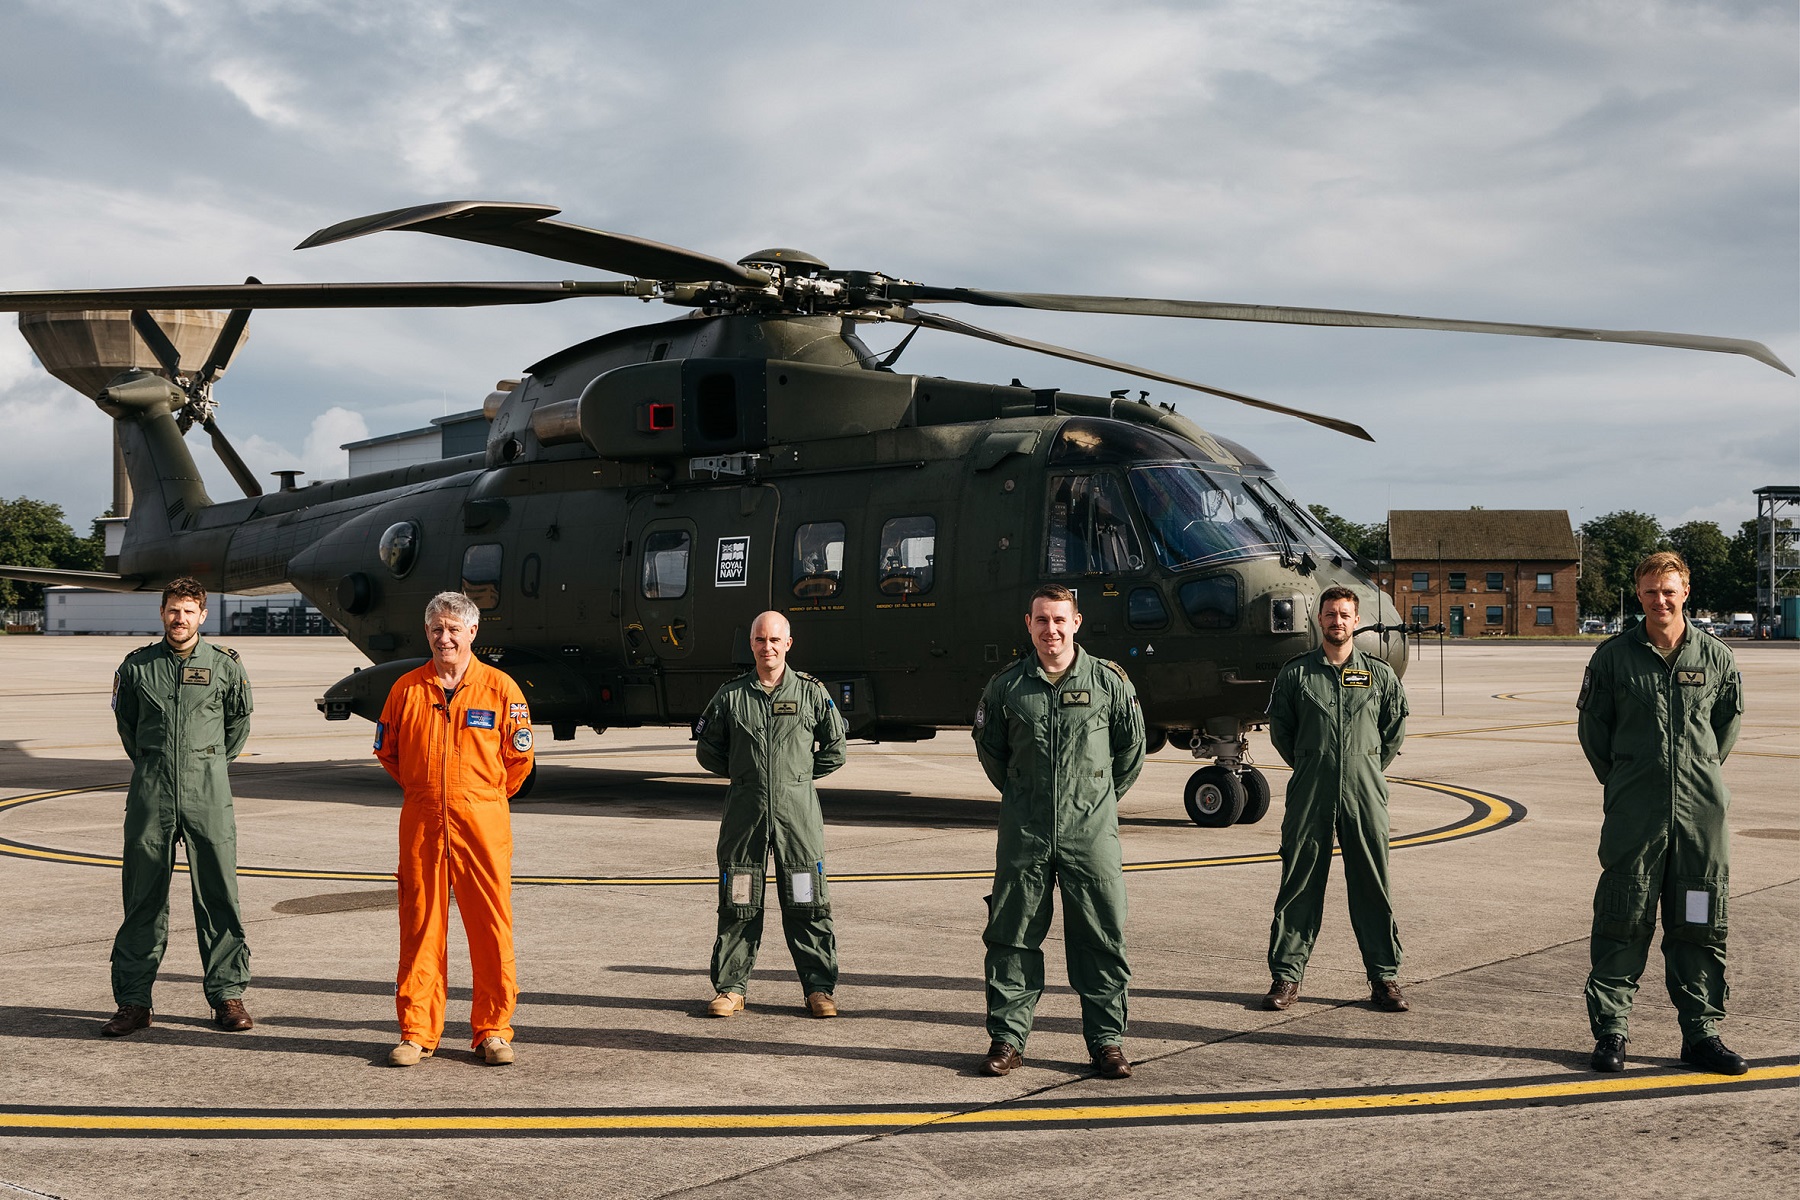 From left to right is: Lt Fred Durrant - CHF Maintenance Test Pilot (Merlin)